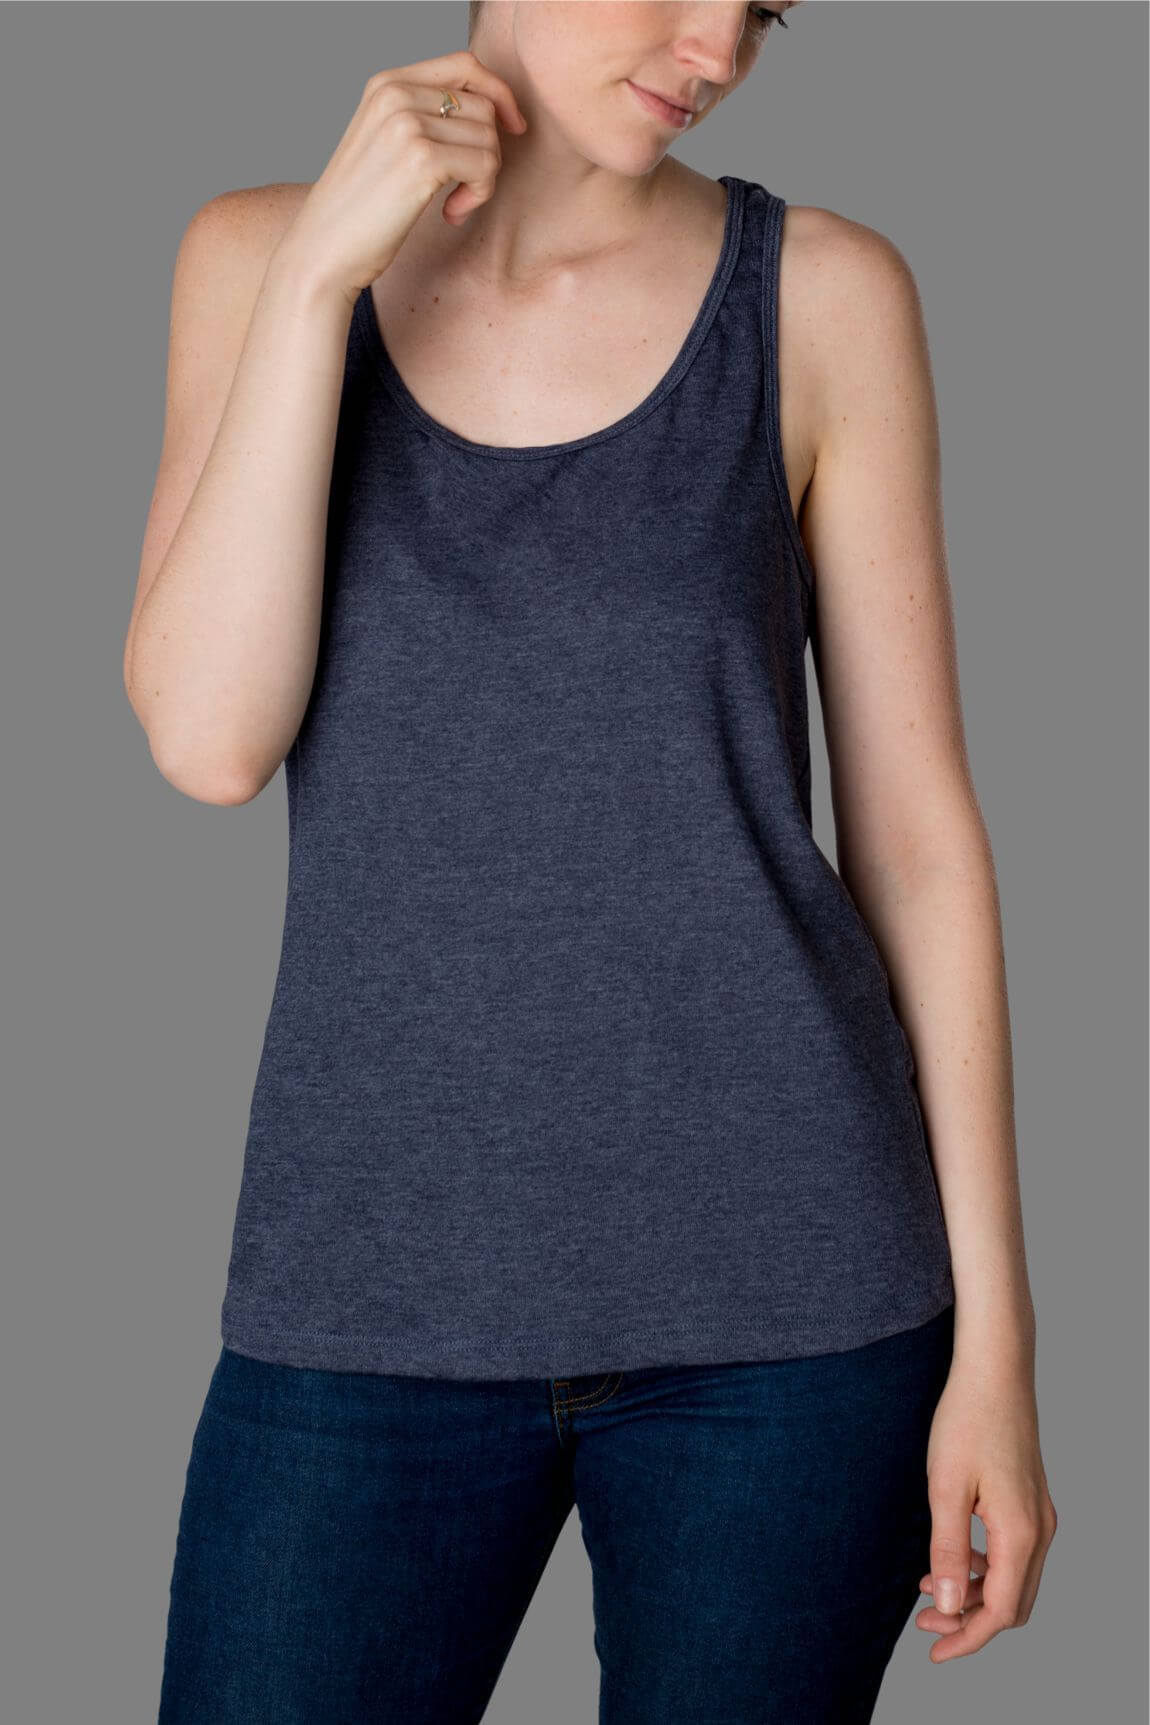 Shop for Women's Tank Tops in Canada